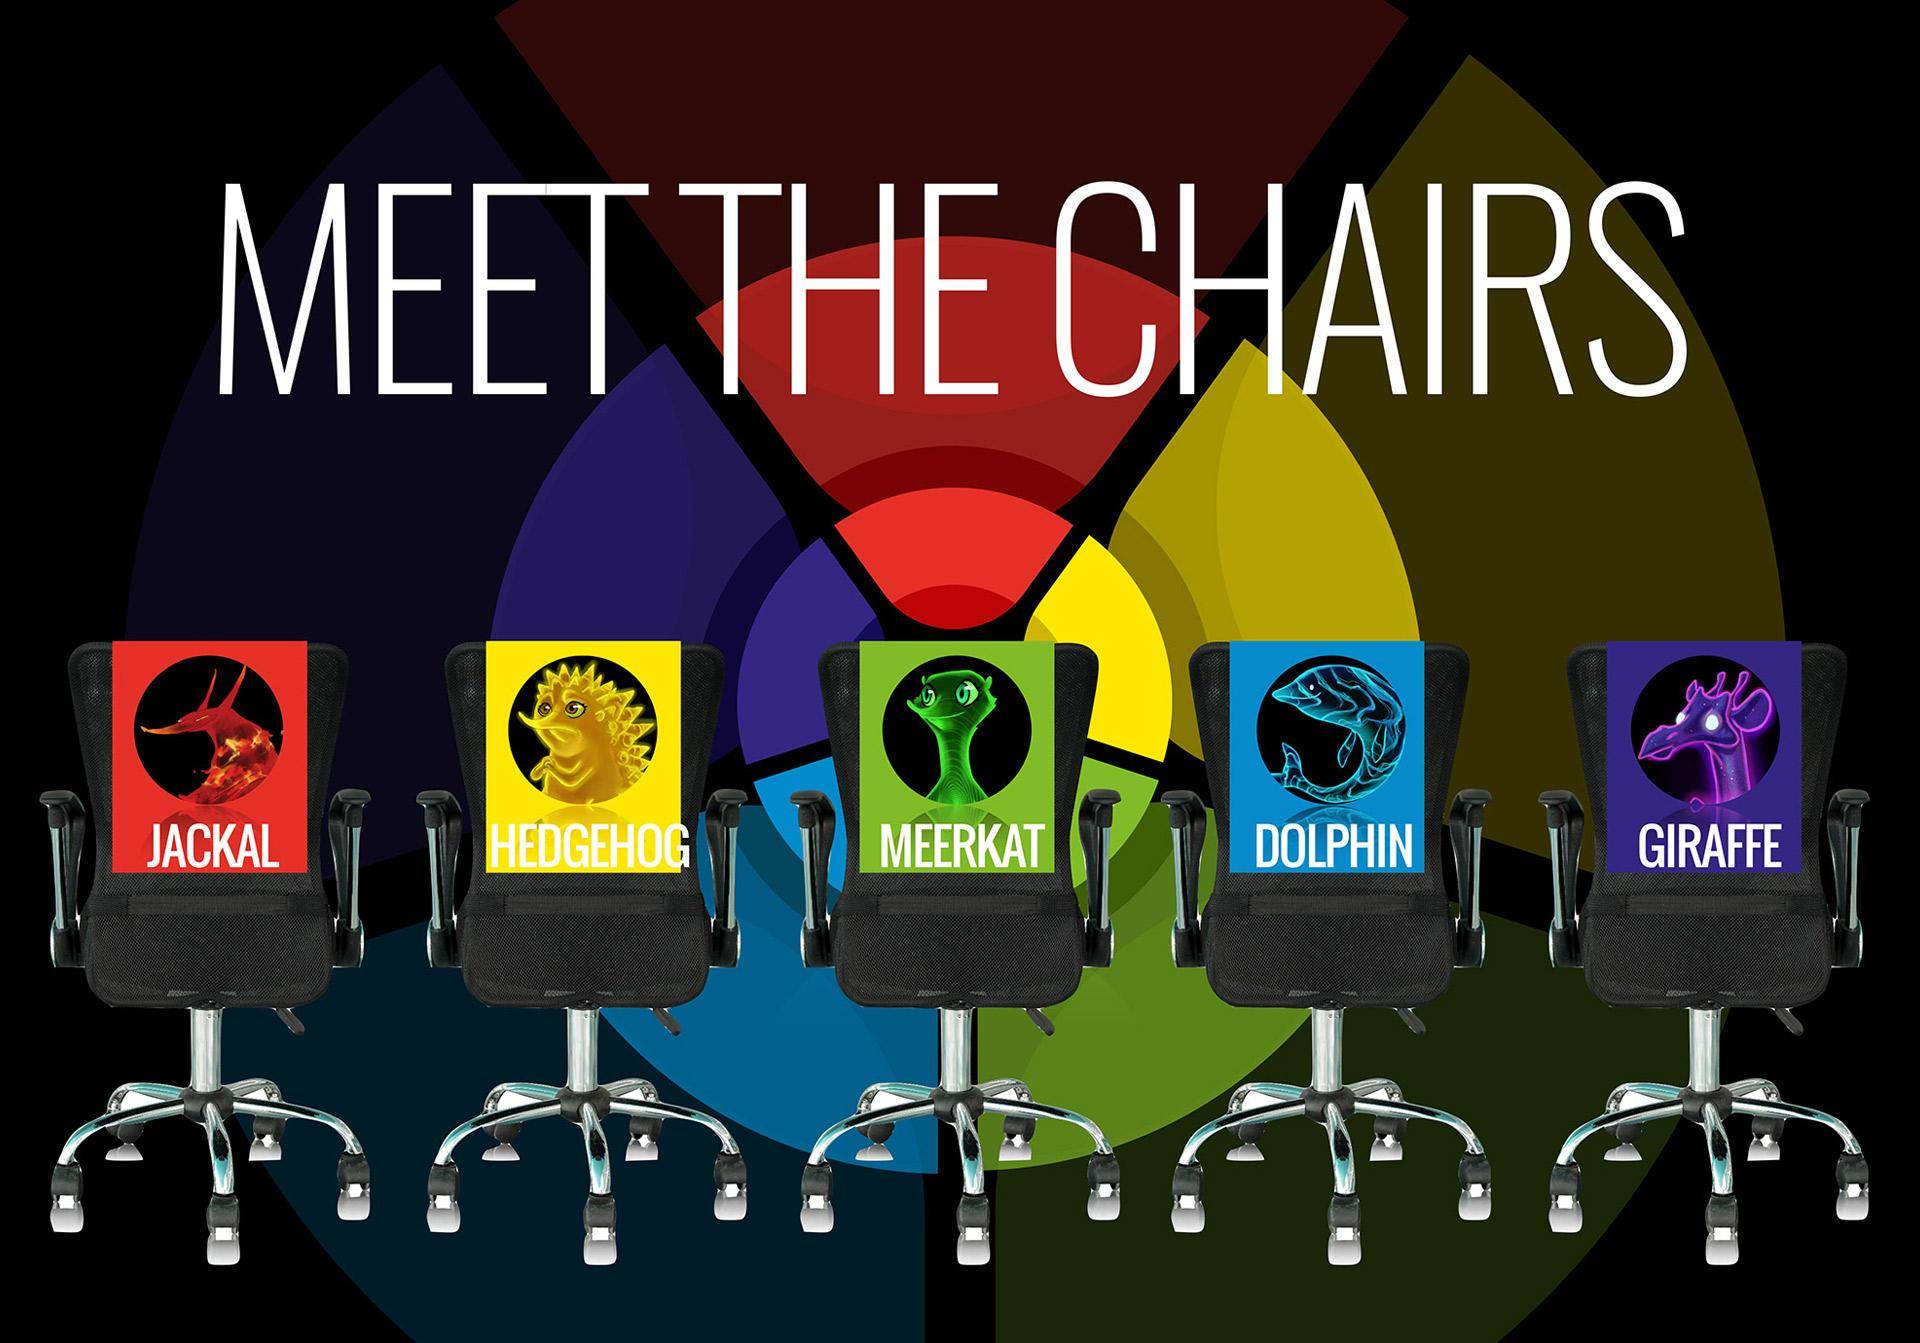 The 5 Chairs - Louise Evans